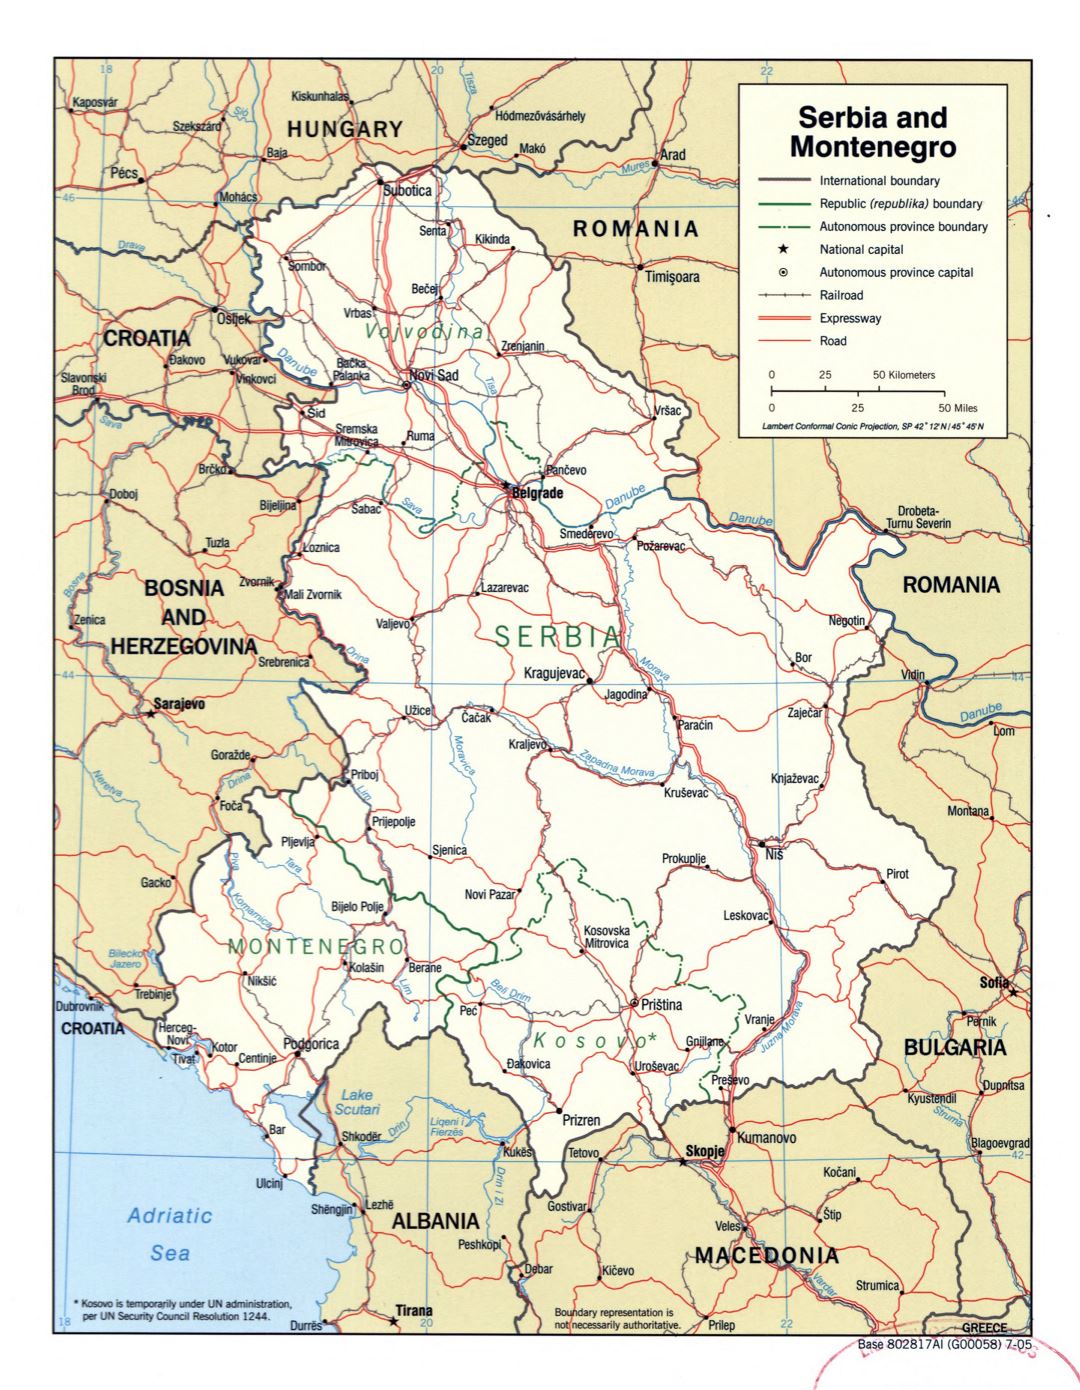 Large scale political map of Serbia and Montenegro with roads, railroads and major cities - 2005